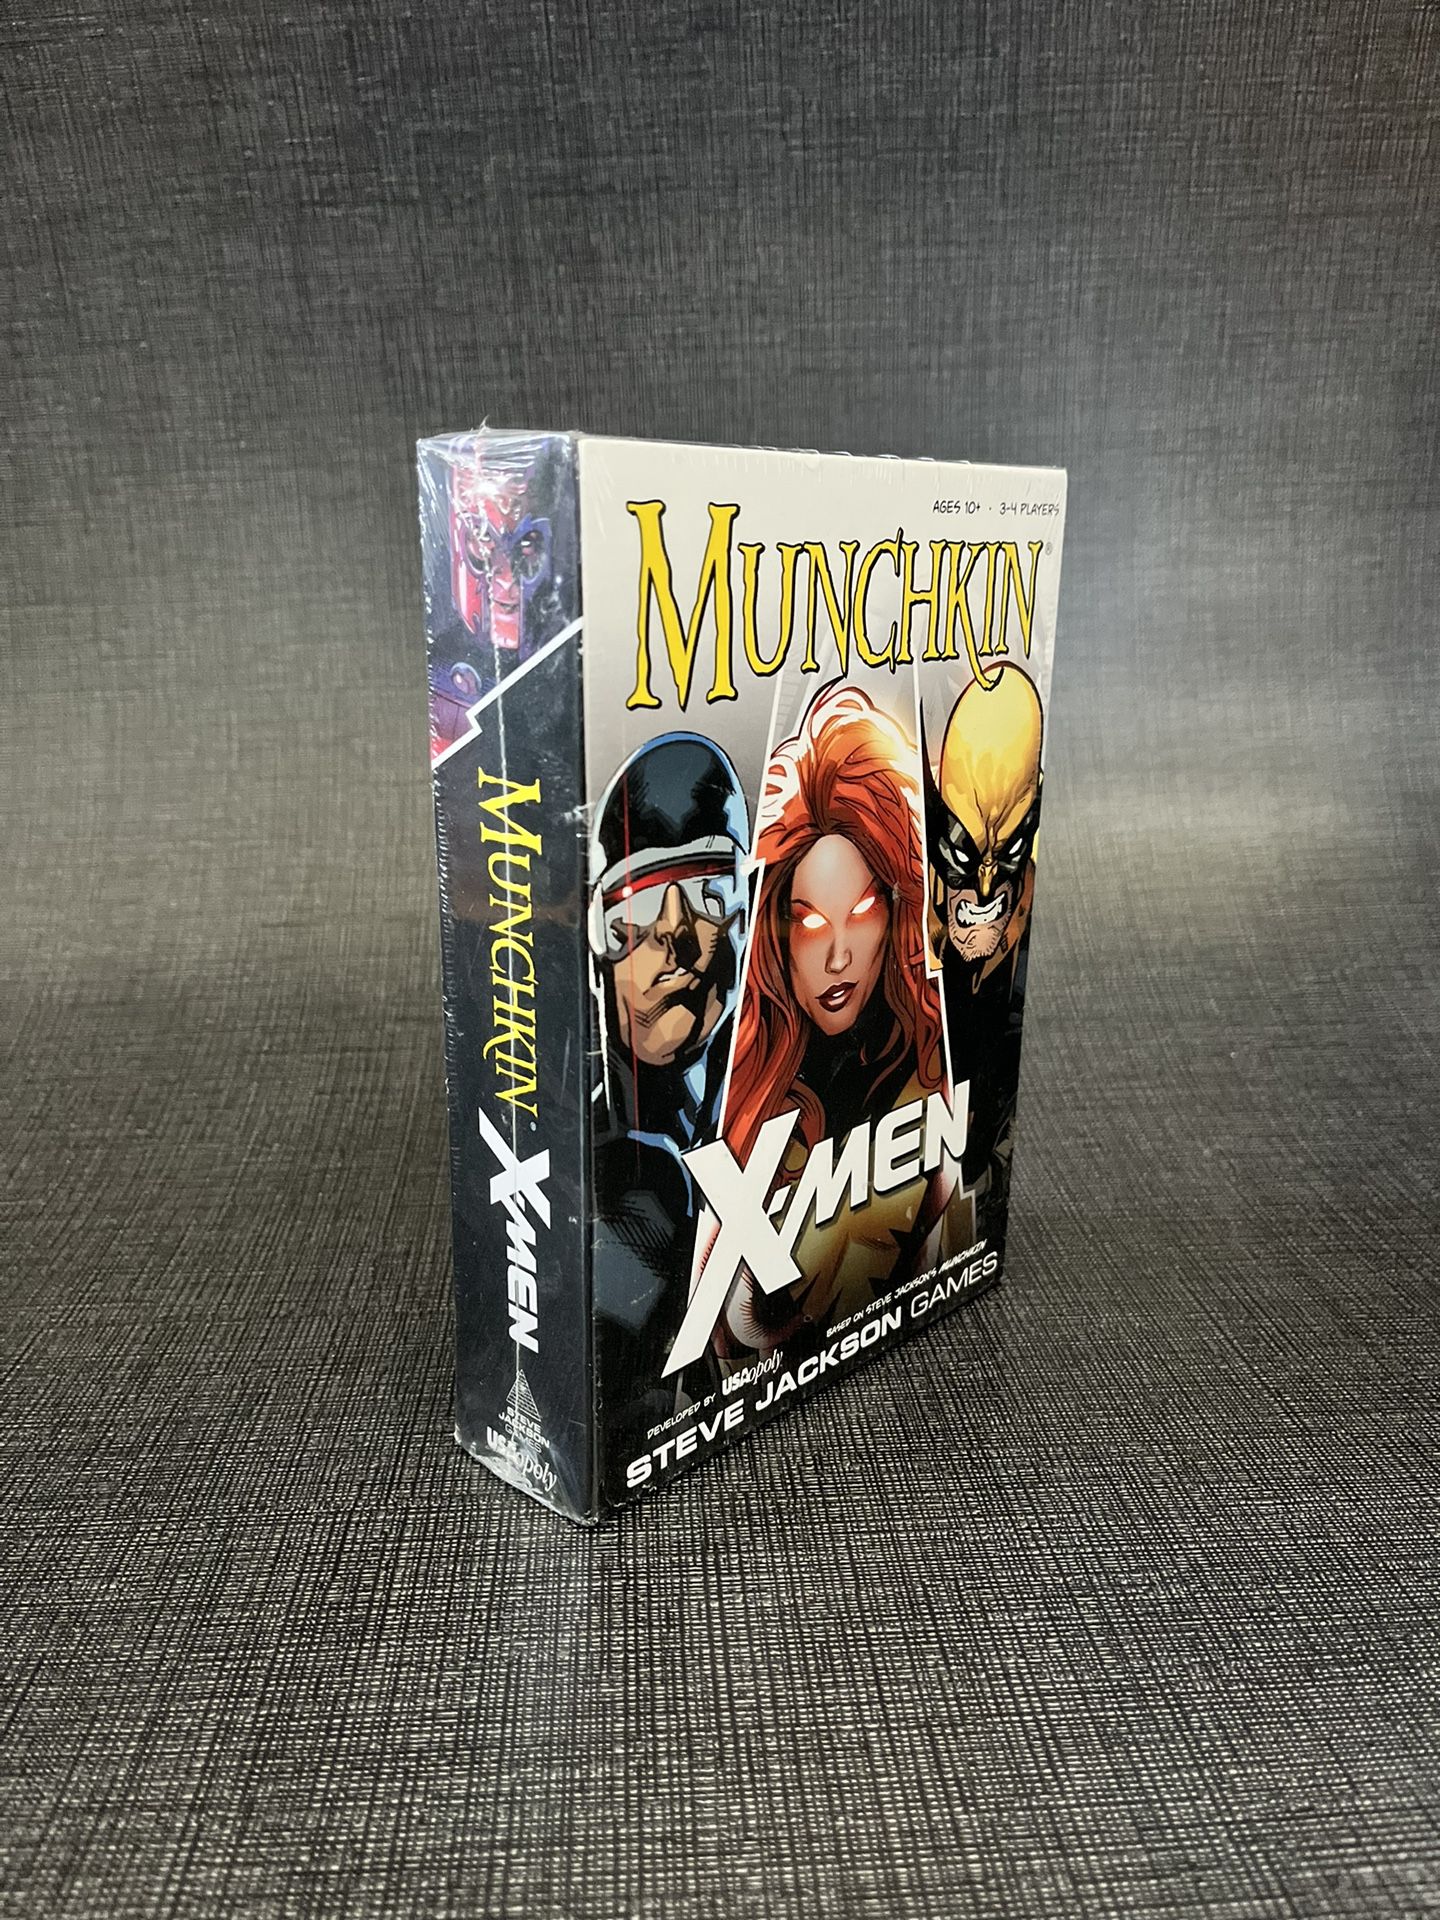 MUNCHKIN: X-MEN - A Role-Playing Adventure Fighting Card Game For 3-4 Players